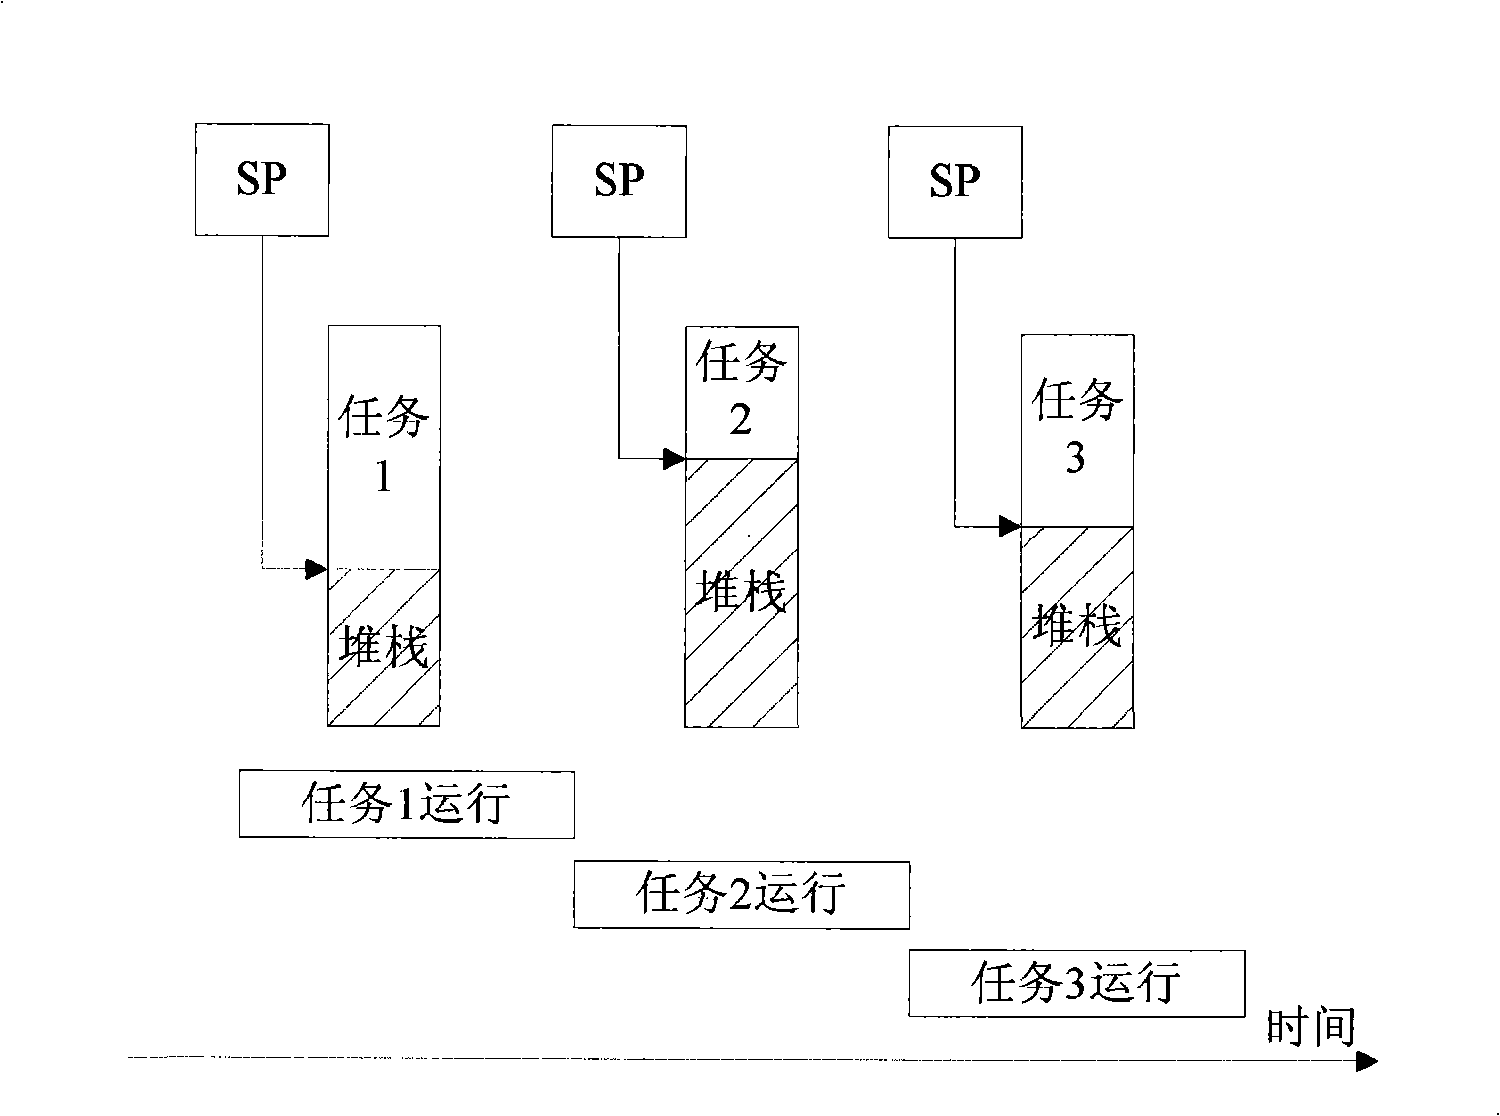 Embedded operating system task switching method and unit